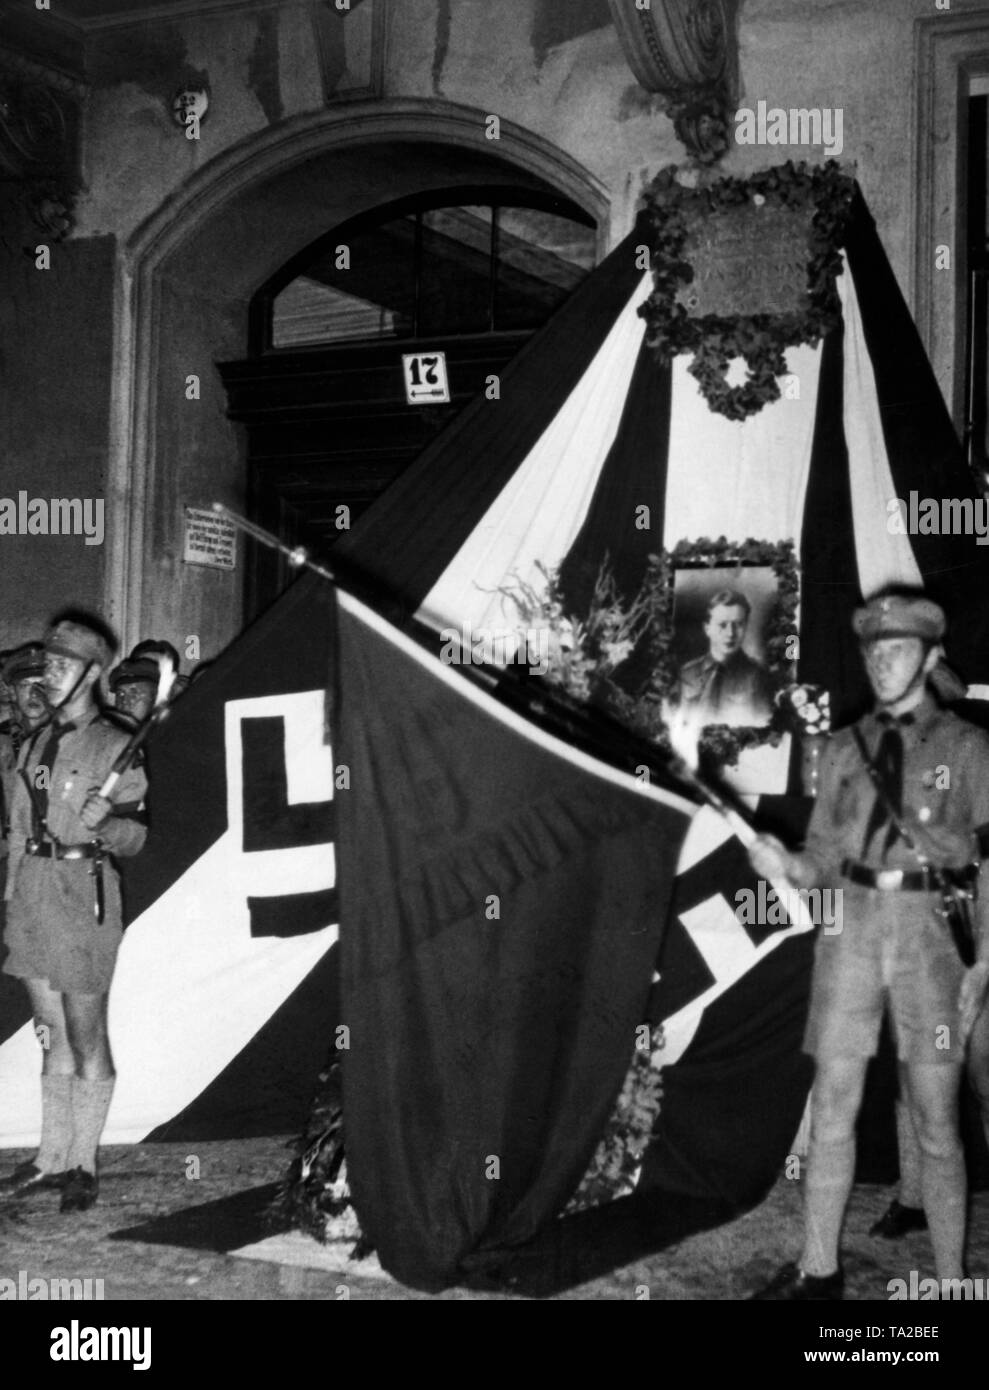 During a memorial service of the Hitlerjugend for the Hitlerjunge Hans Hoffmann, who was murdered on the Lausitzer Platz on 17 August 1931, the HJ flags are lowered while attendants are singing the 'Lied vom guten Kameraden' ('song of the good comrade'). Stock Photo